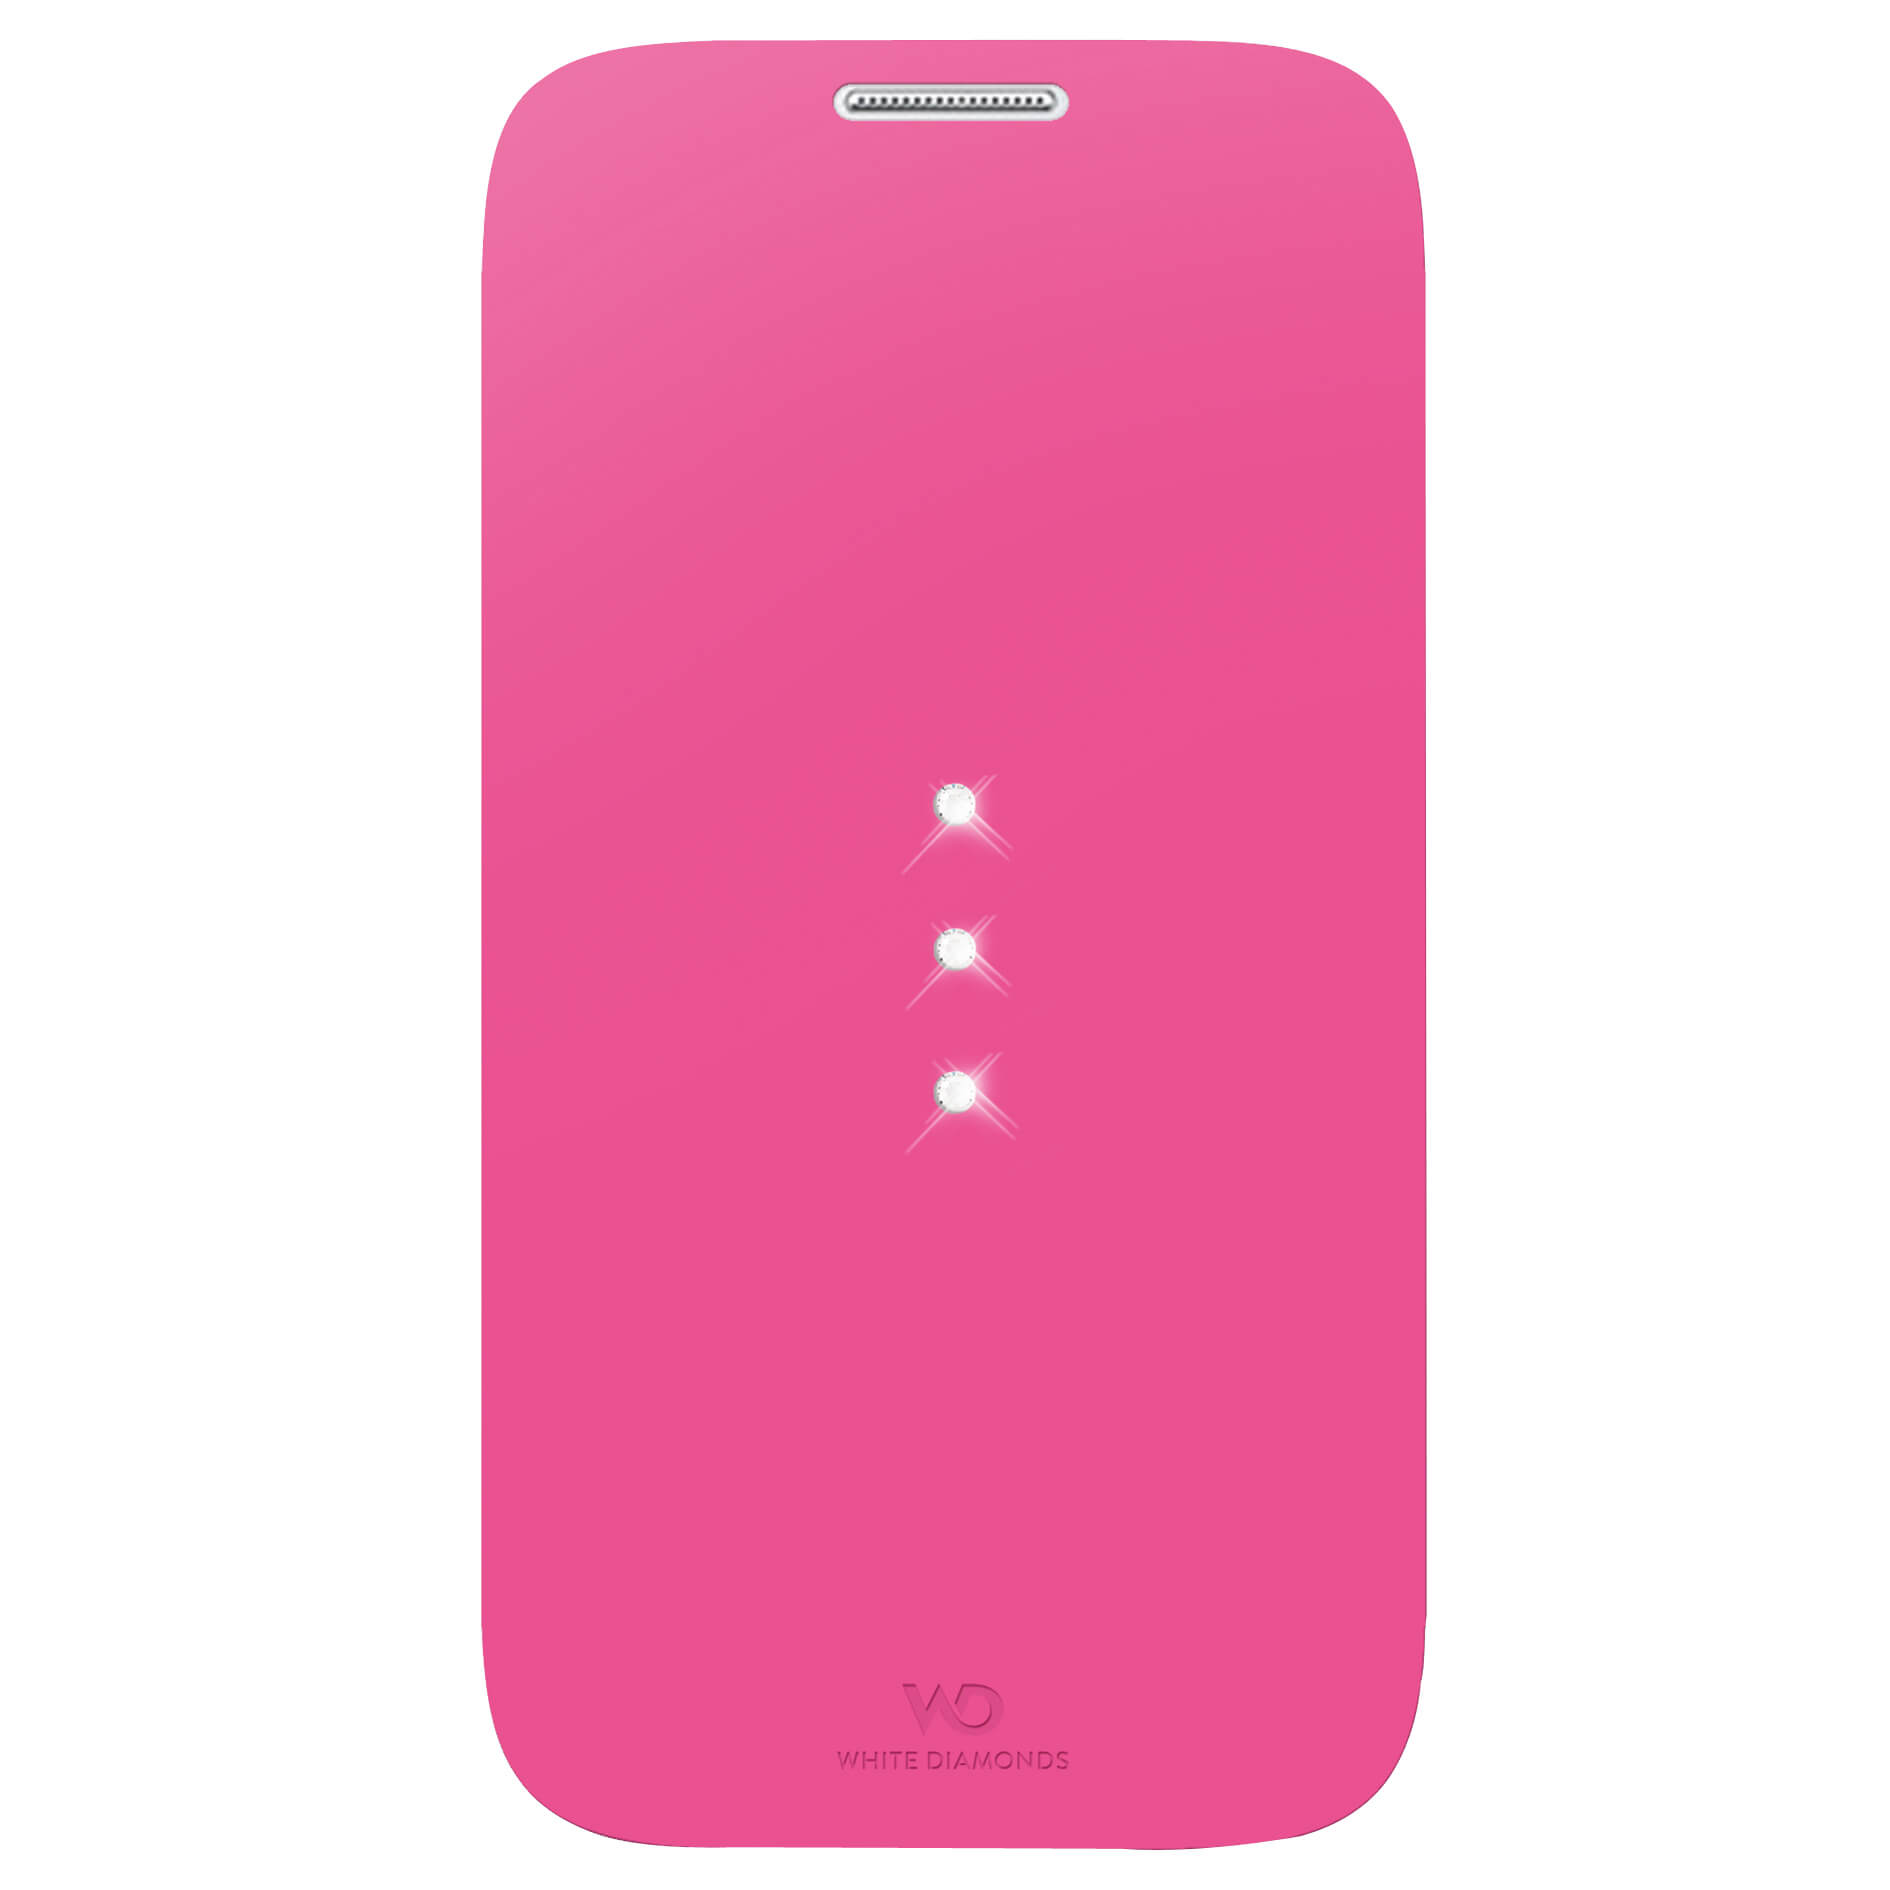 Crystal Booklet Case for Sams ung Galaxy S 4, pink